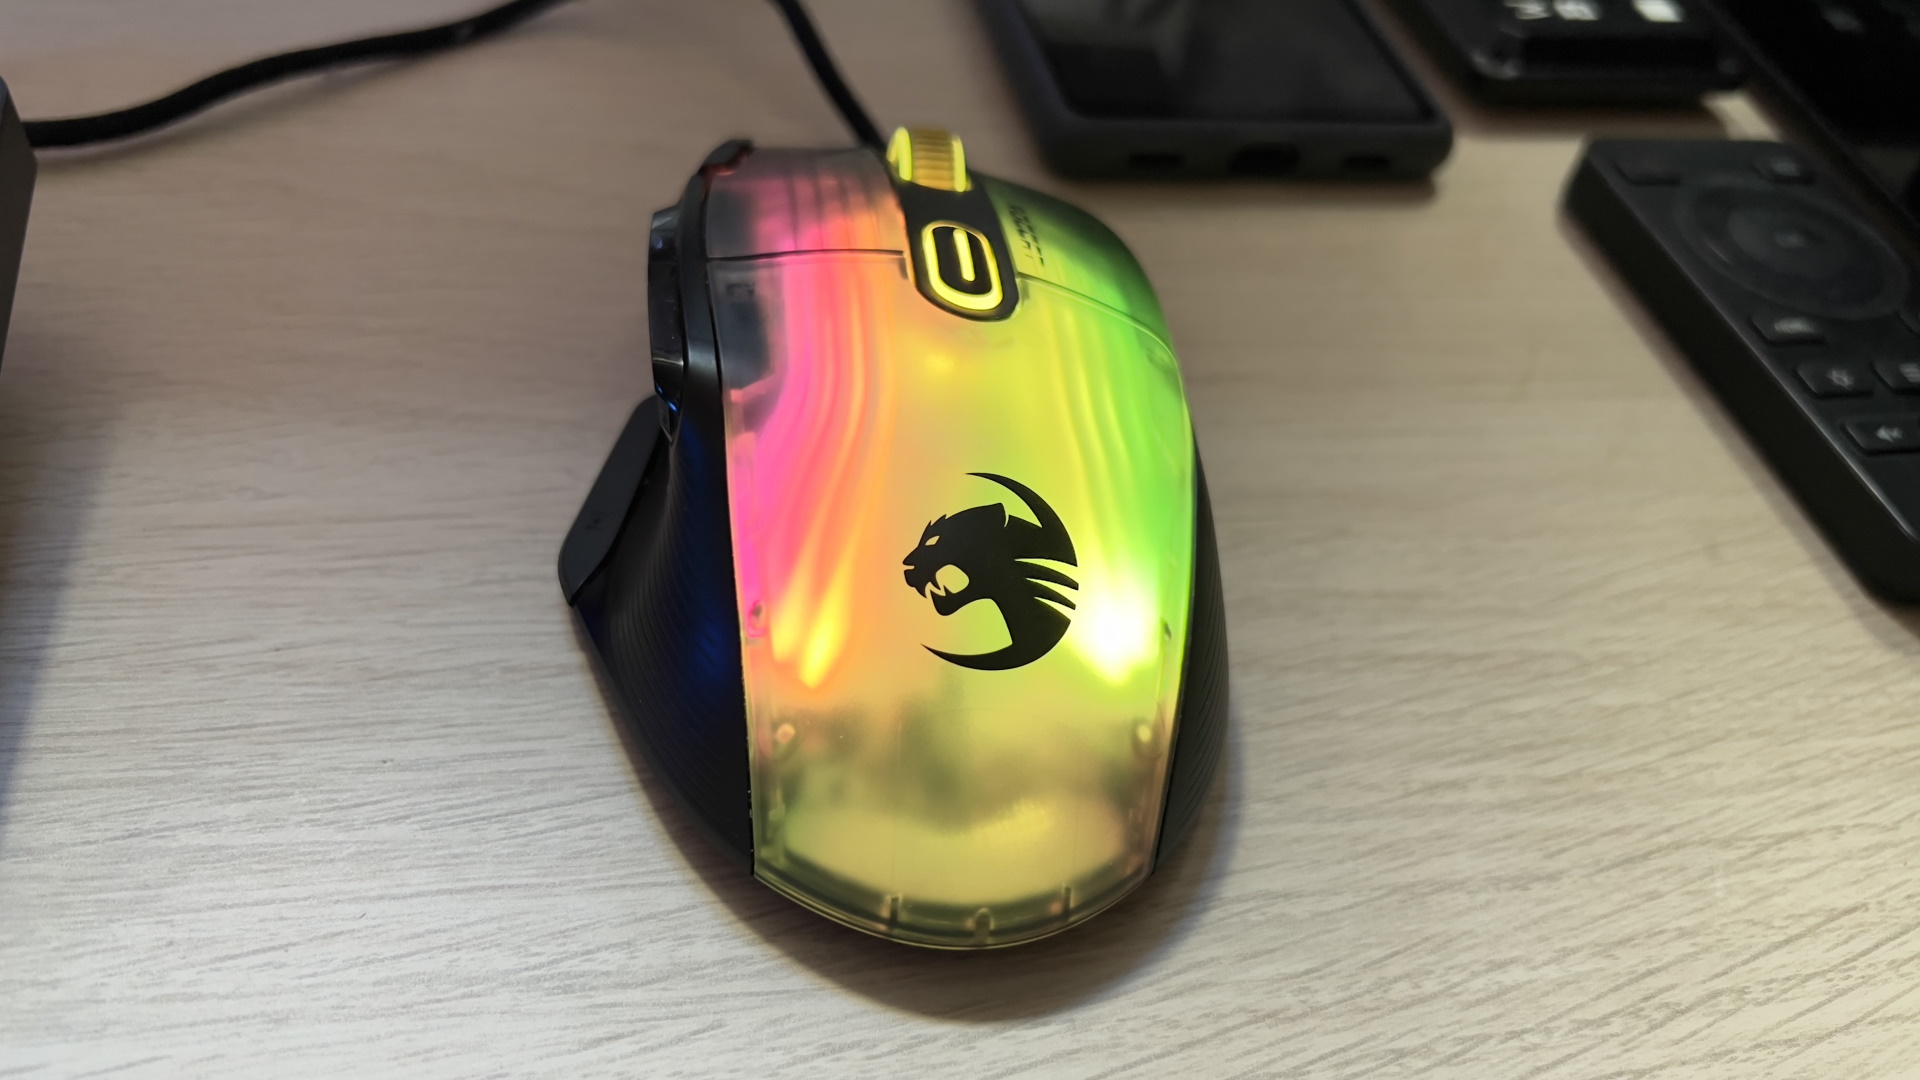 Roccat Kone XP gaming mouse